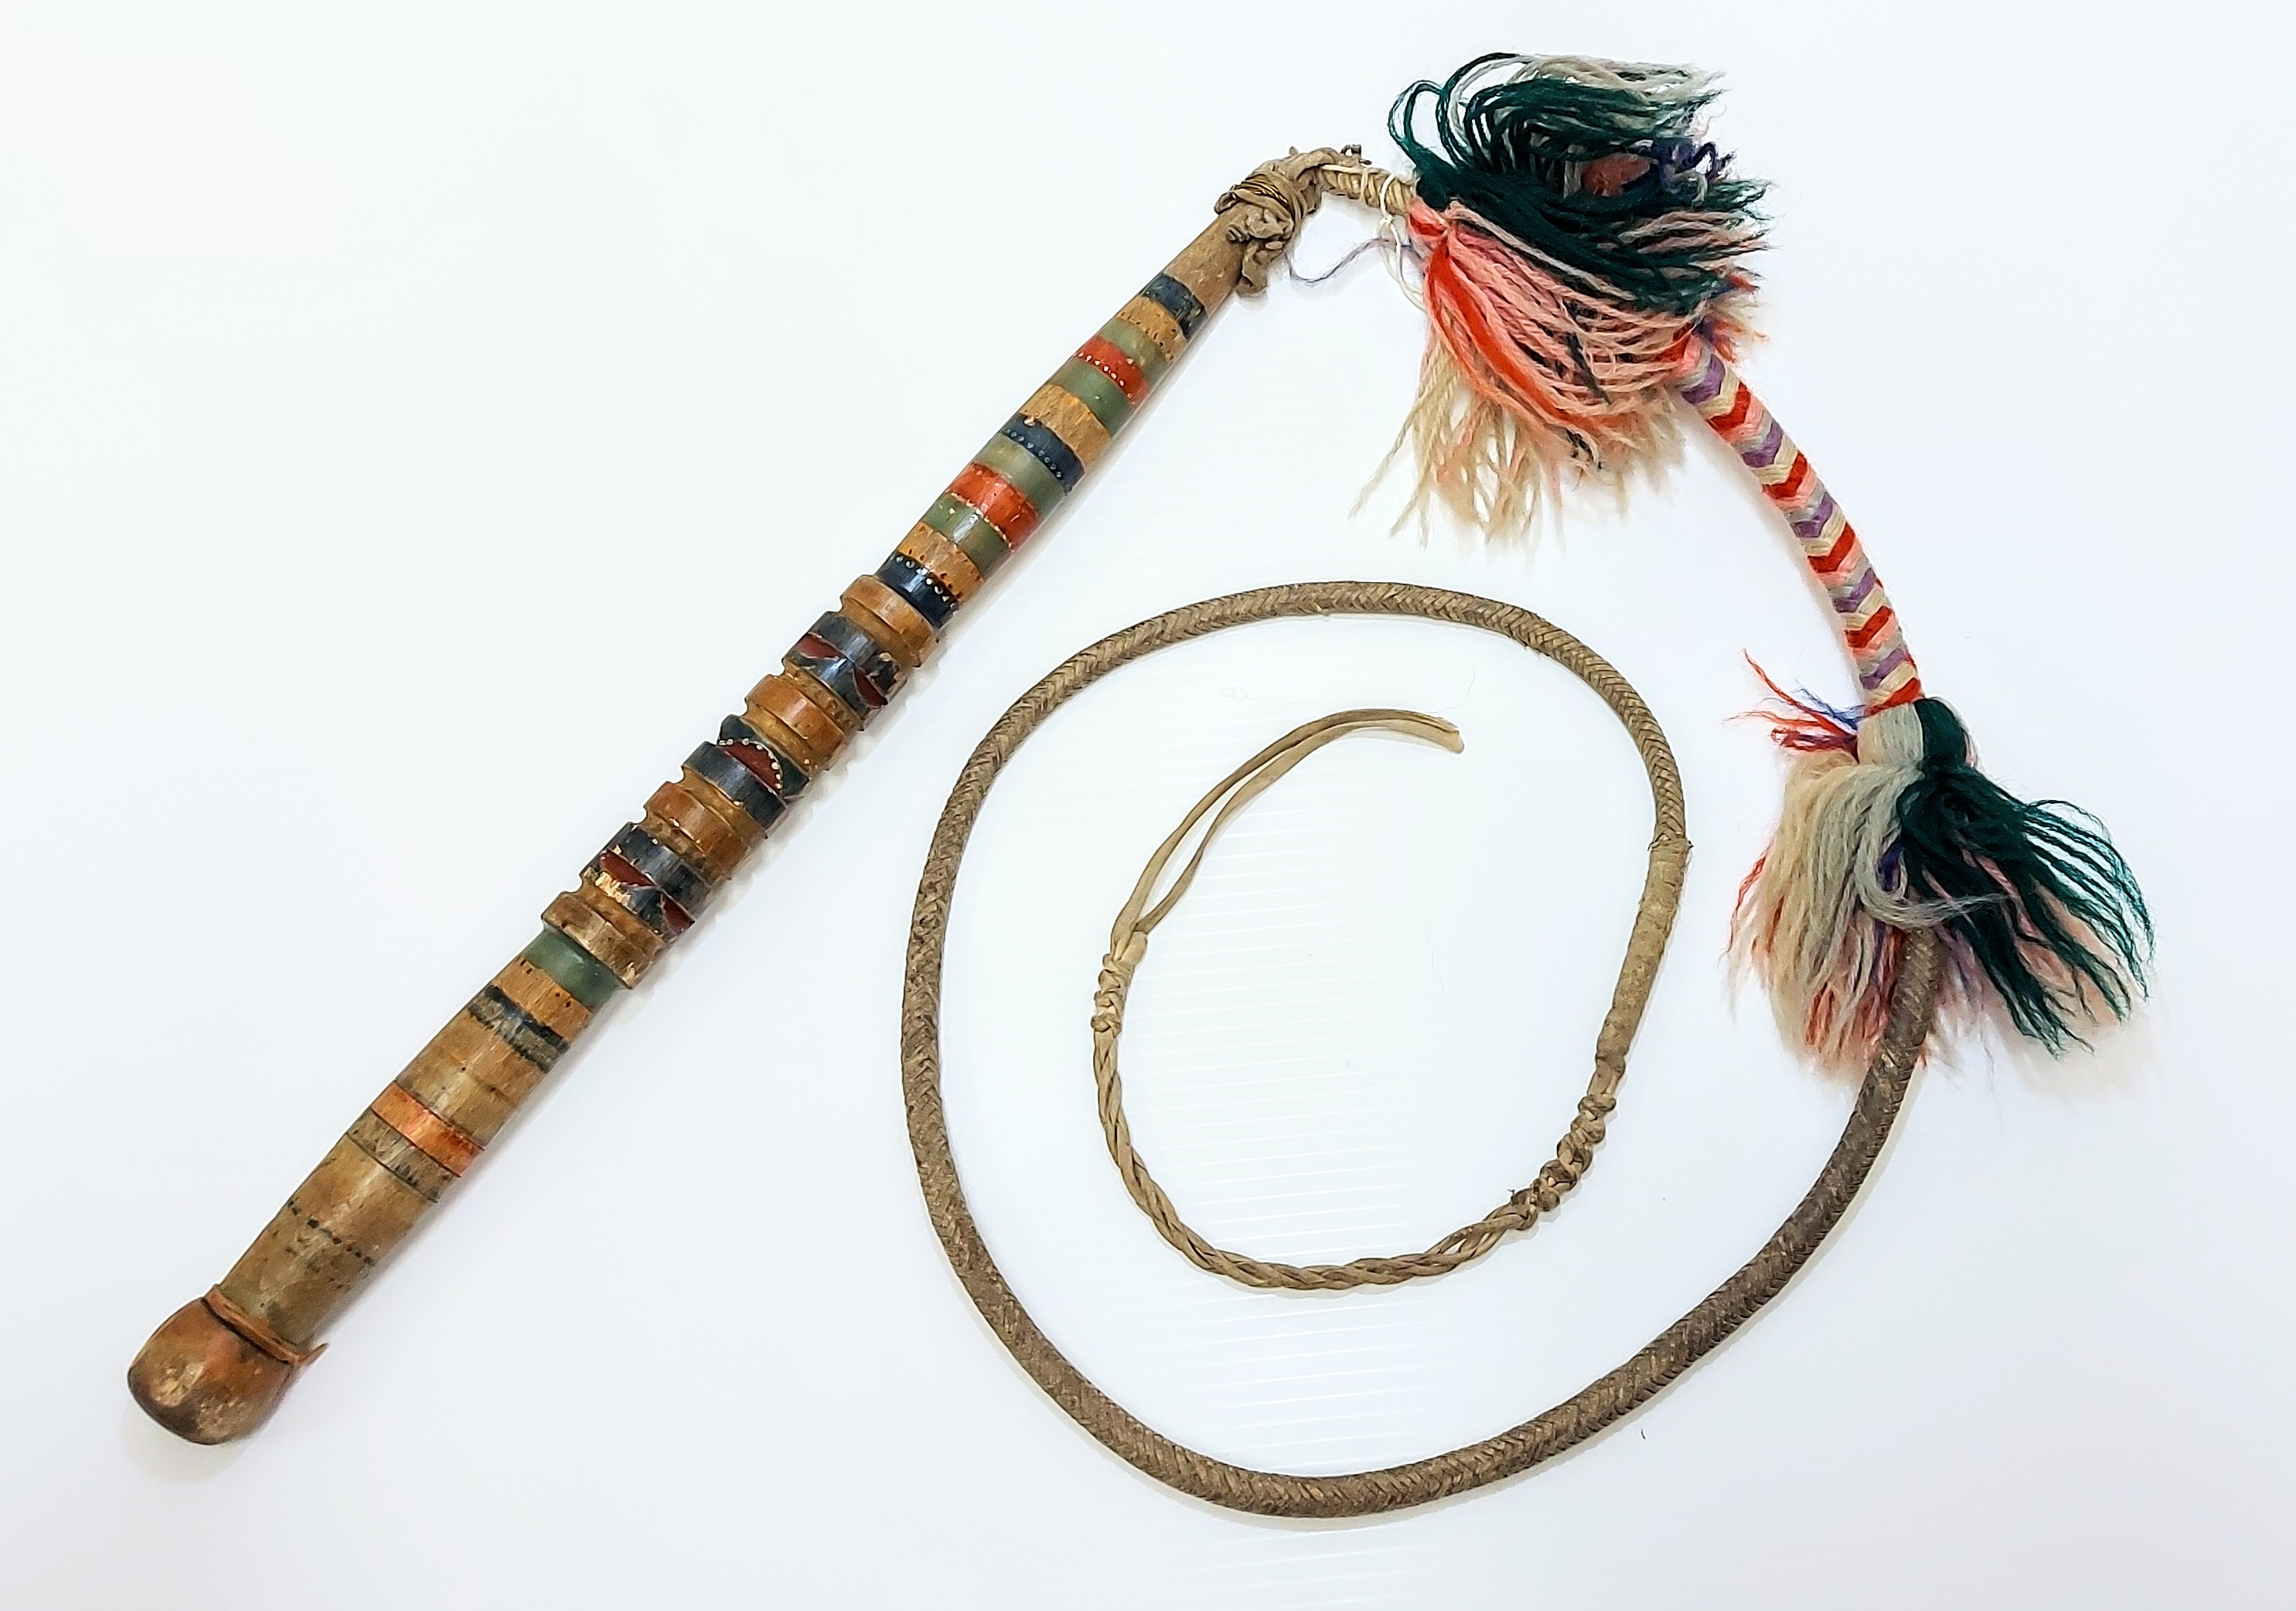 This is a homemade whip used for Dog Mushing. It is beautifully decorated with yarn detailing and an ornately carved (and painted) wooden handle. It generally would not be used to strike the dogs -rather it would be "cracked" which would make noise to encourage the dogs to run. Dog sled teams were a major source of transportation in the area from the early years up until 1950 or so. Kids would mush dogs to school, mail was brought by dog team and trappers relied on them while on the trapline. 
2004.01.08 / Clarke, Pete + Doris